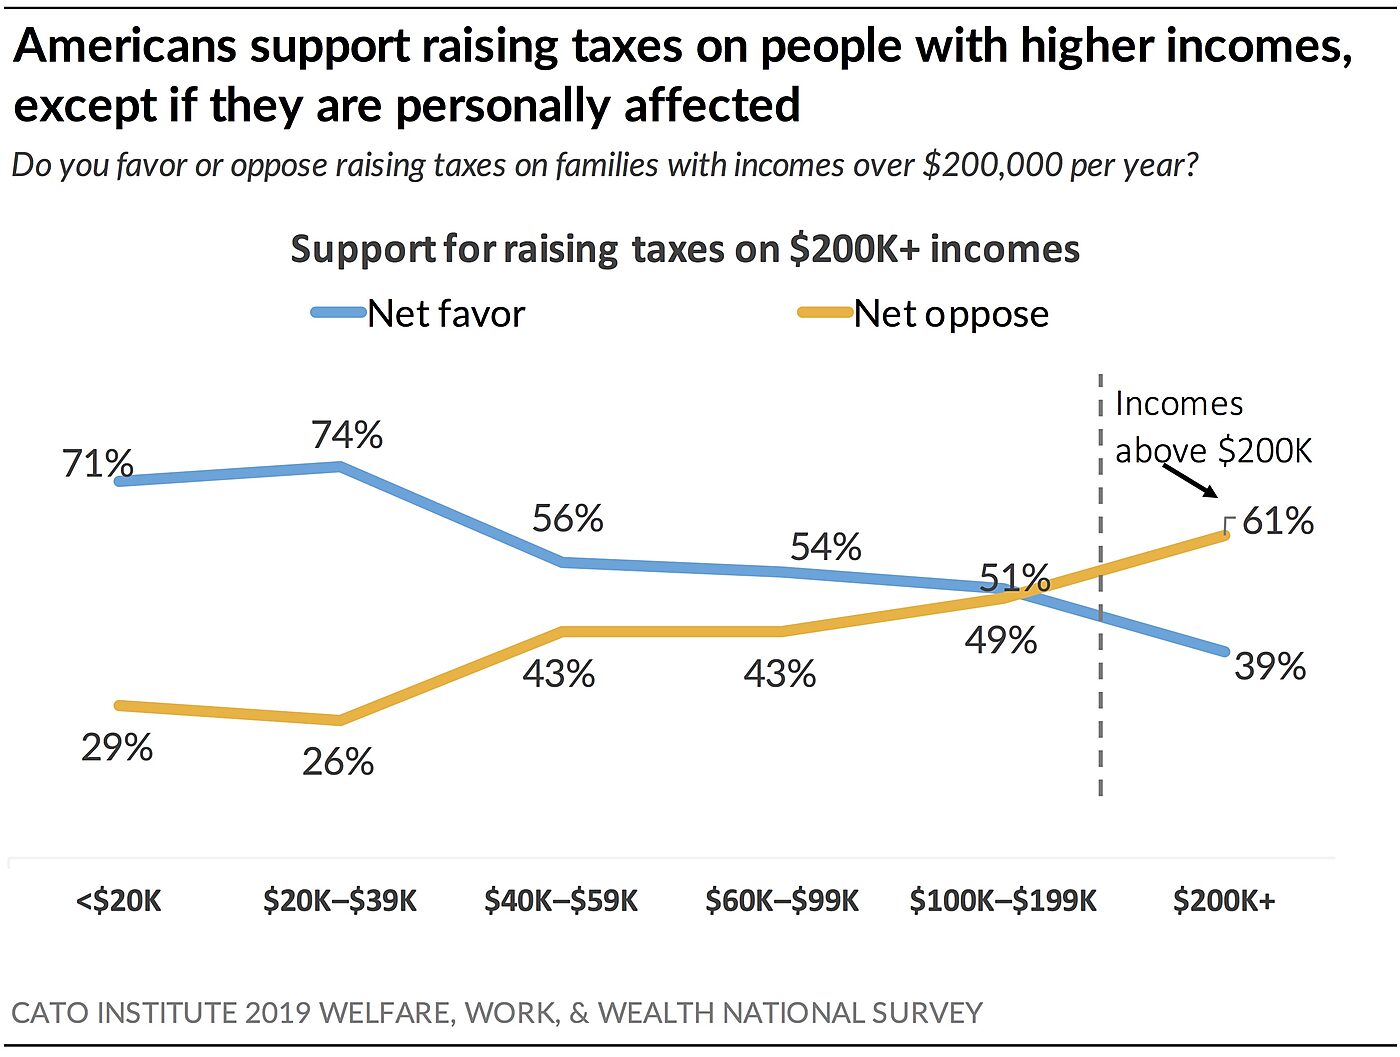 Americans Support Raising Taxes on People with Higher Incomes